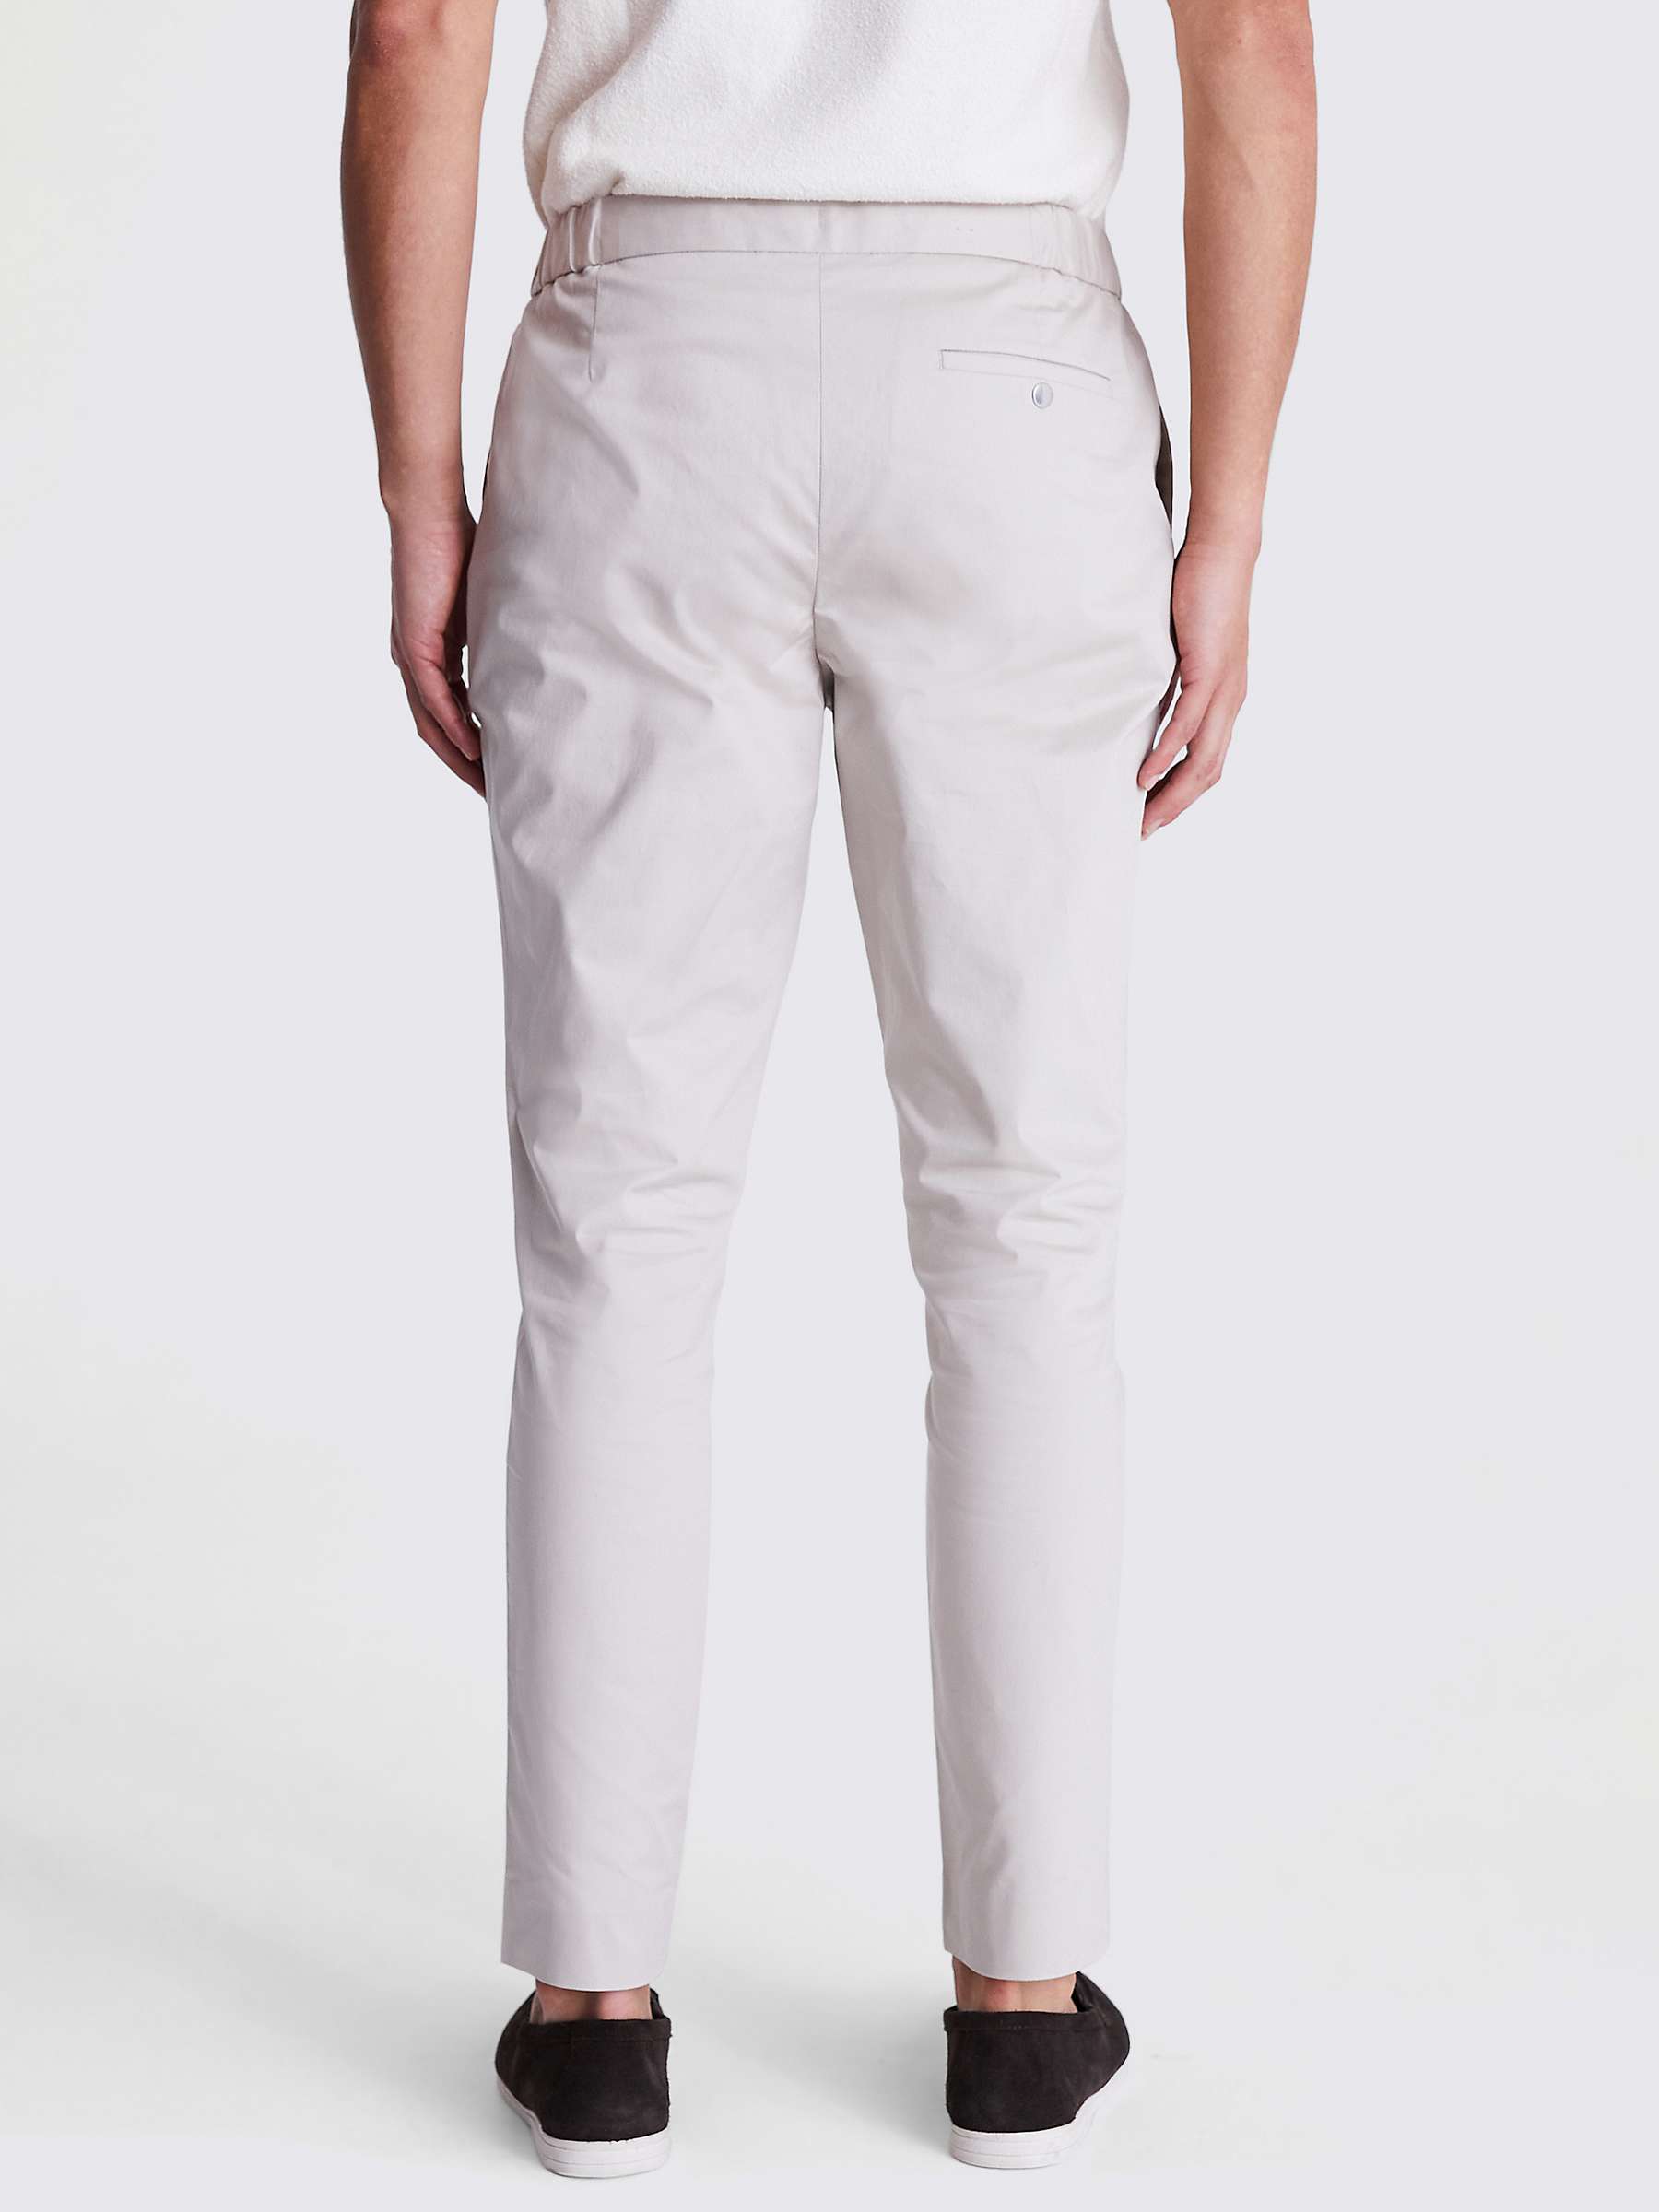 Buy Moss Slim Fit Worker Chinos Online at johnlewis.com